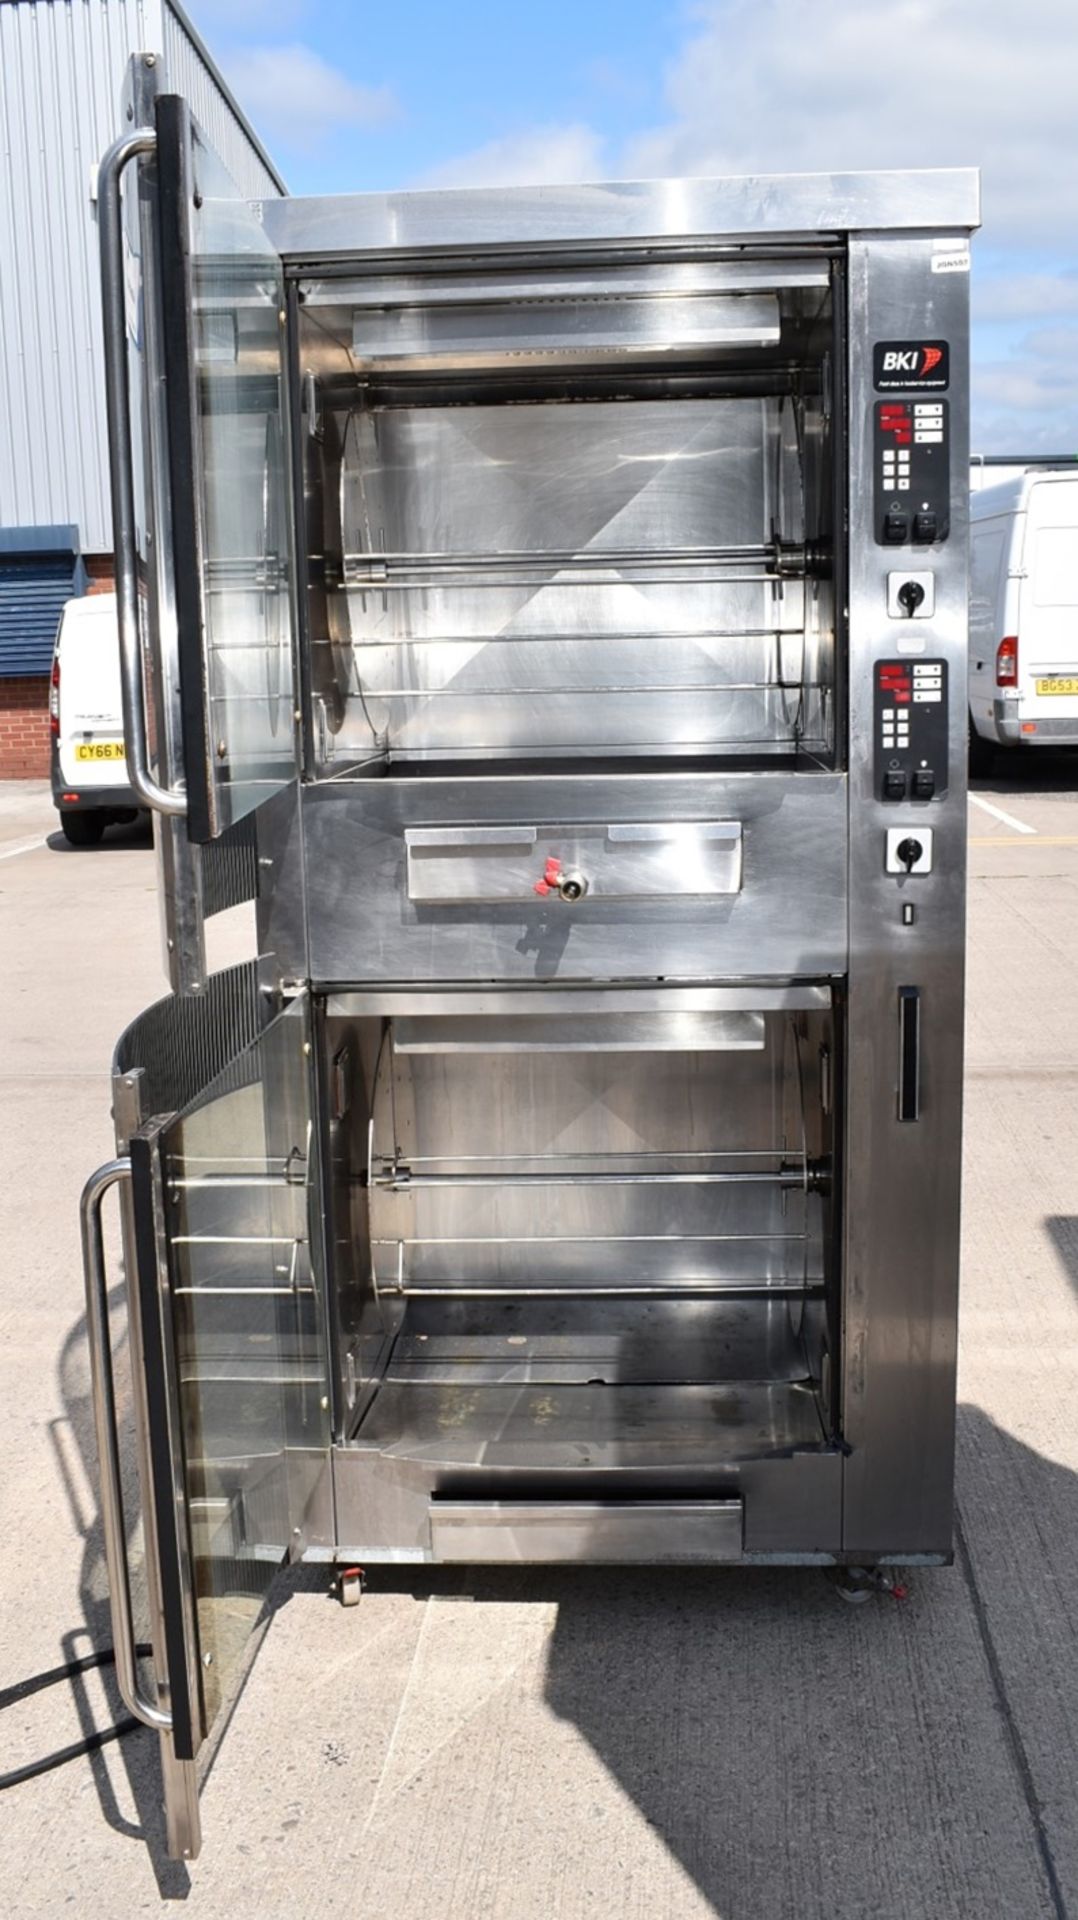 1 x BKI BBQ King Commercial Double Rotisserie Chicken Oven With Stand - Type VGUK16 - 3 Phase - Image 14 of 21